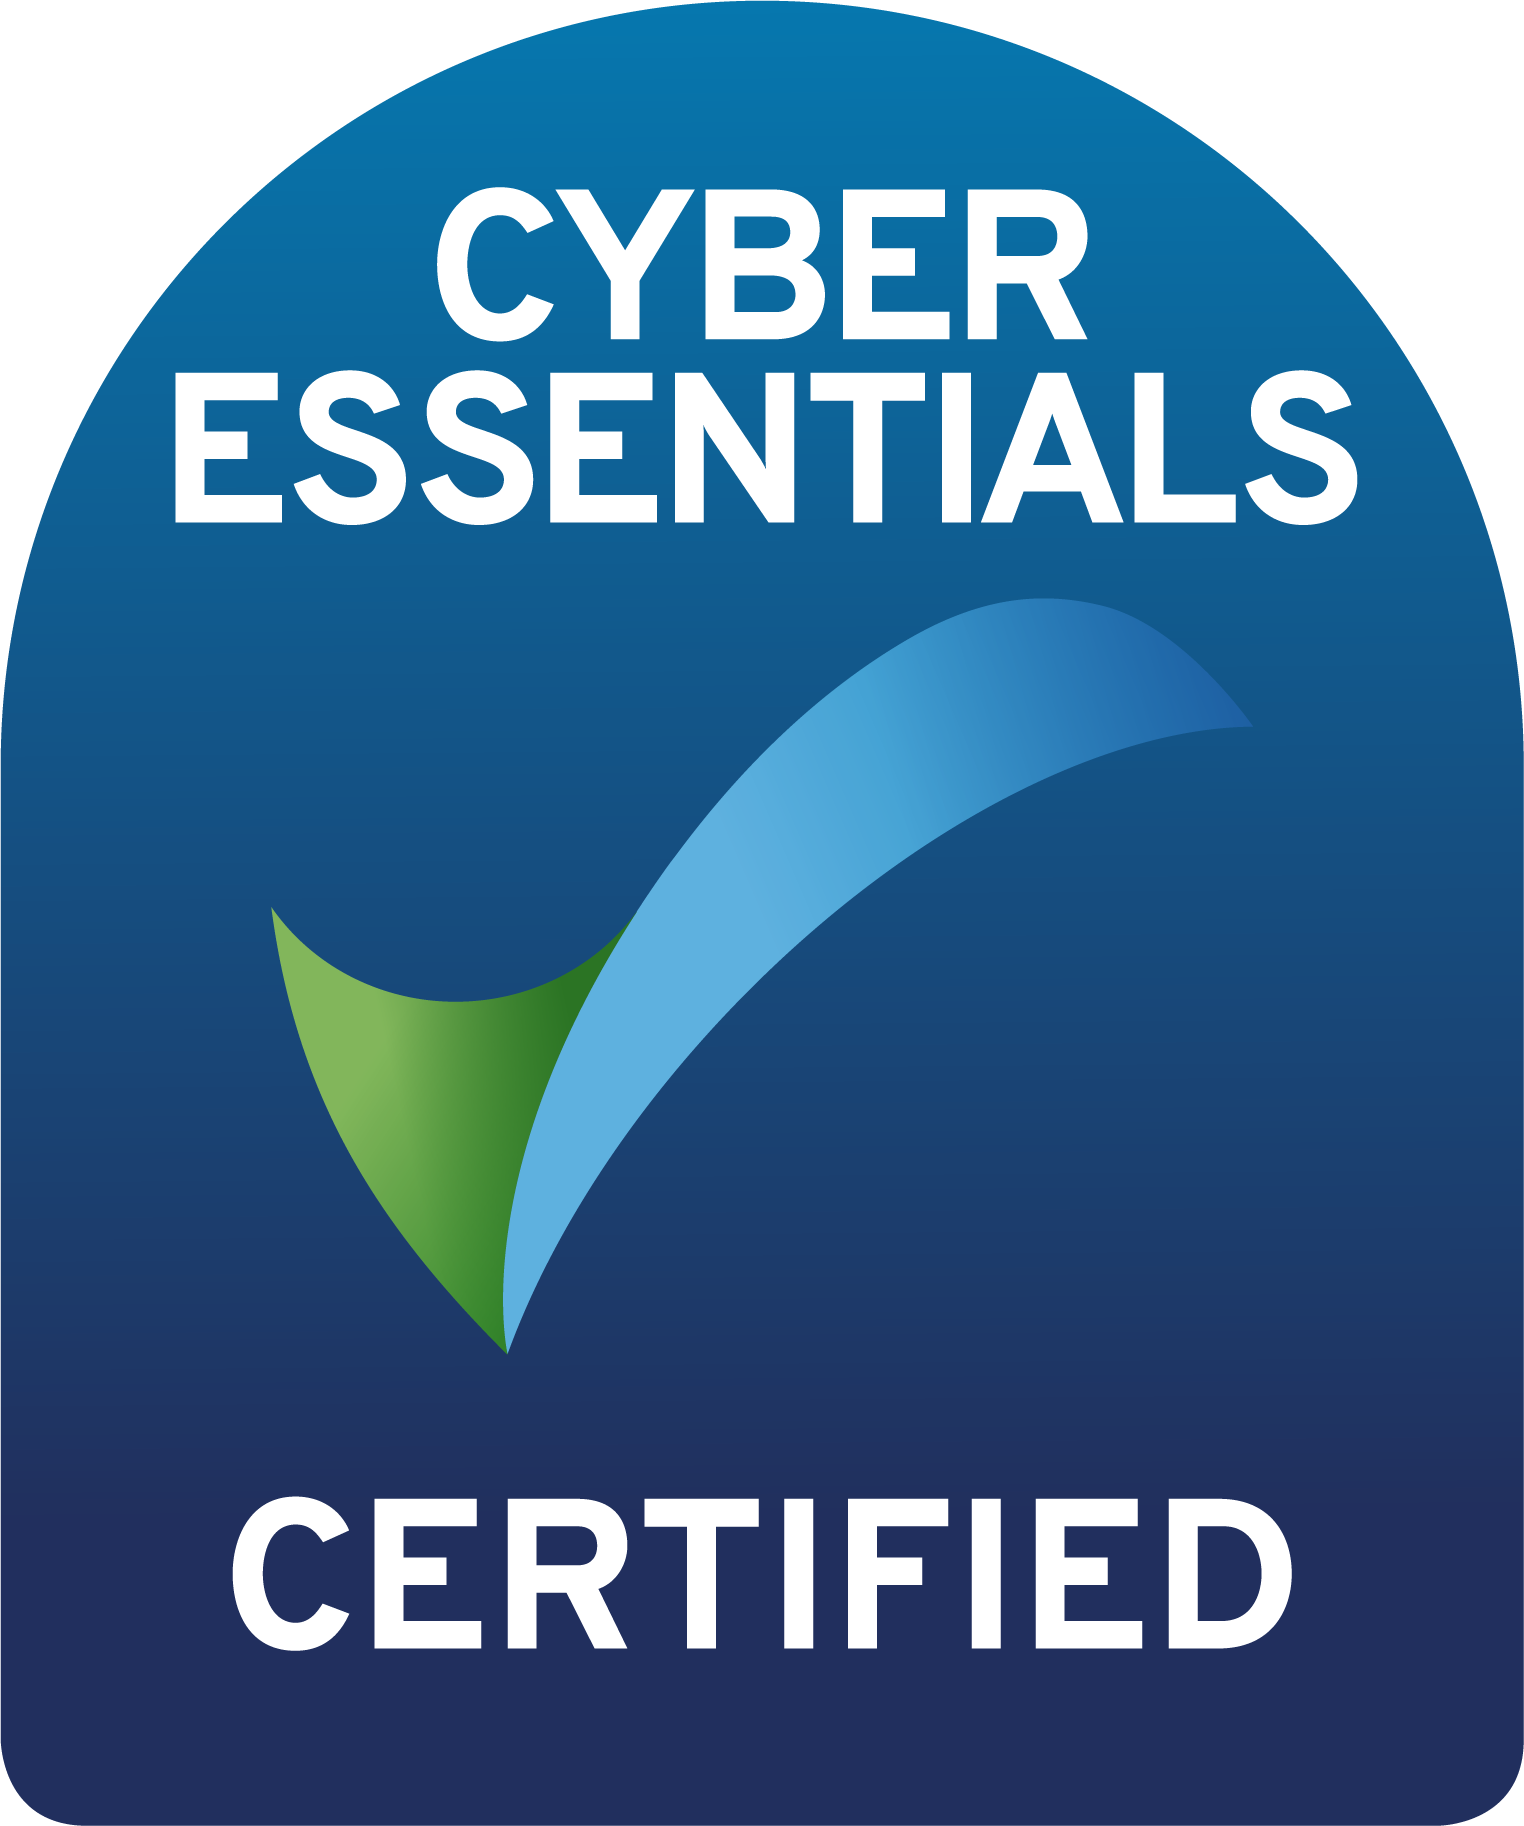 We've secured the Cyber Essentials Certificate of assurance once again!